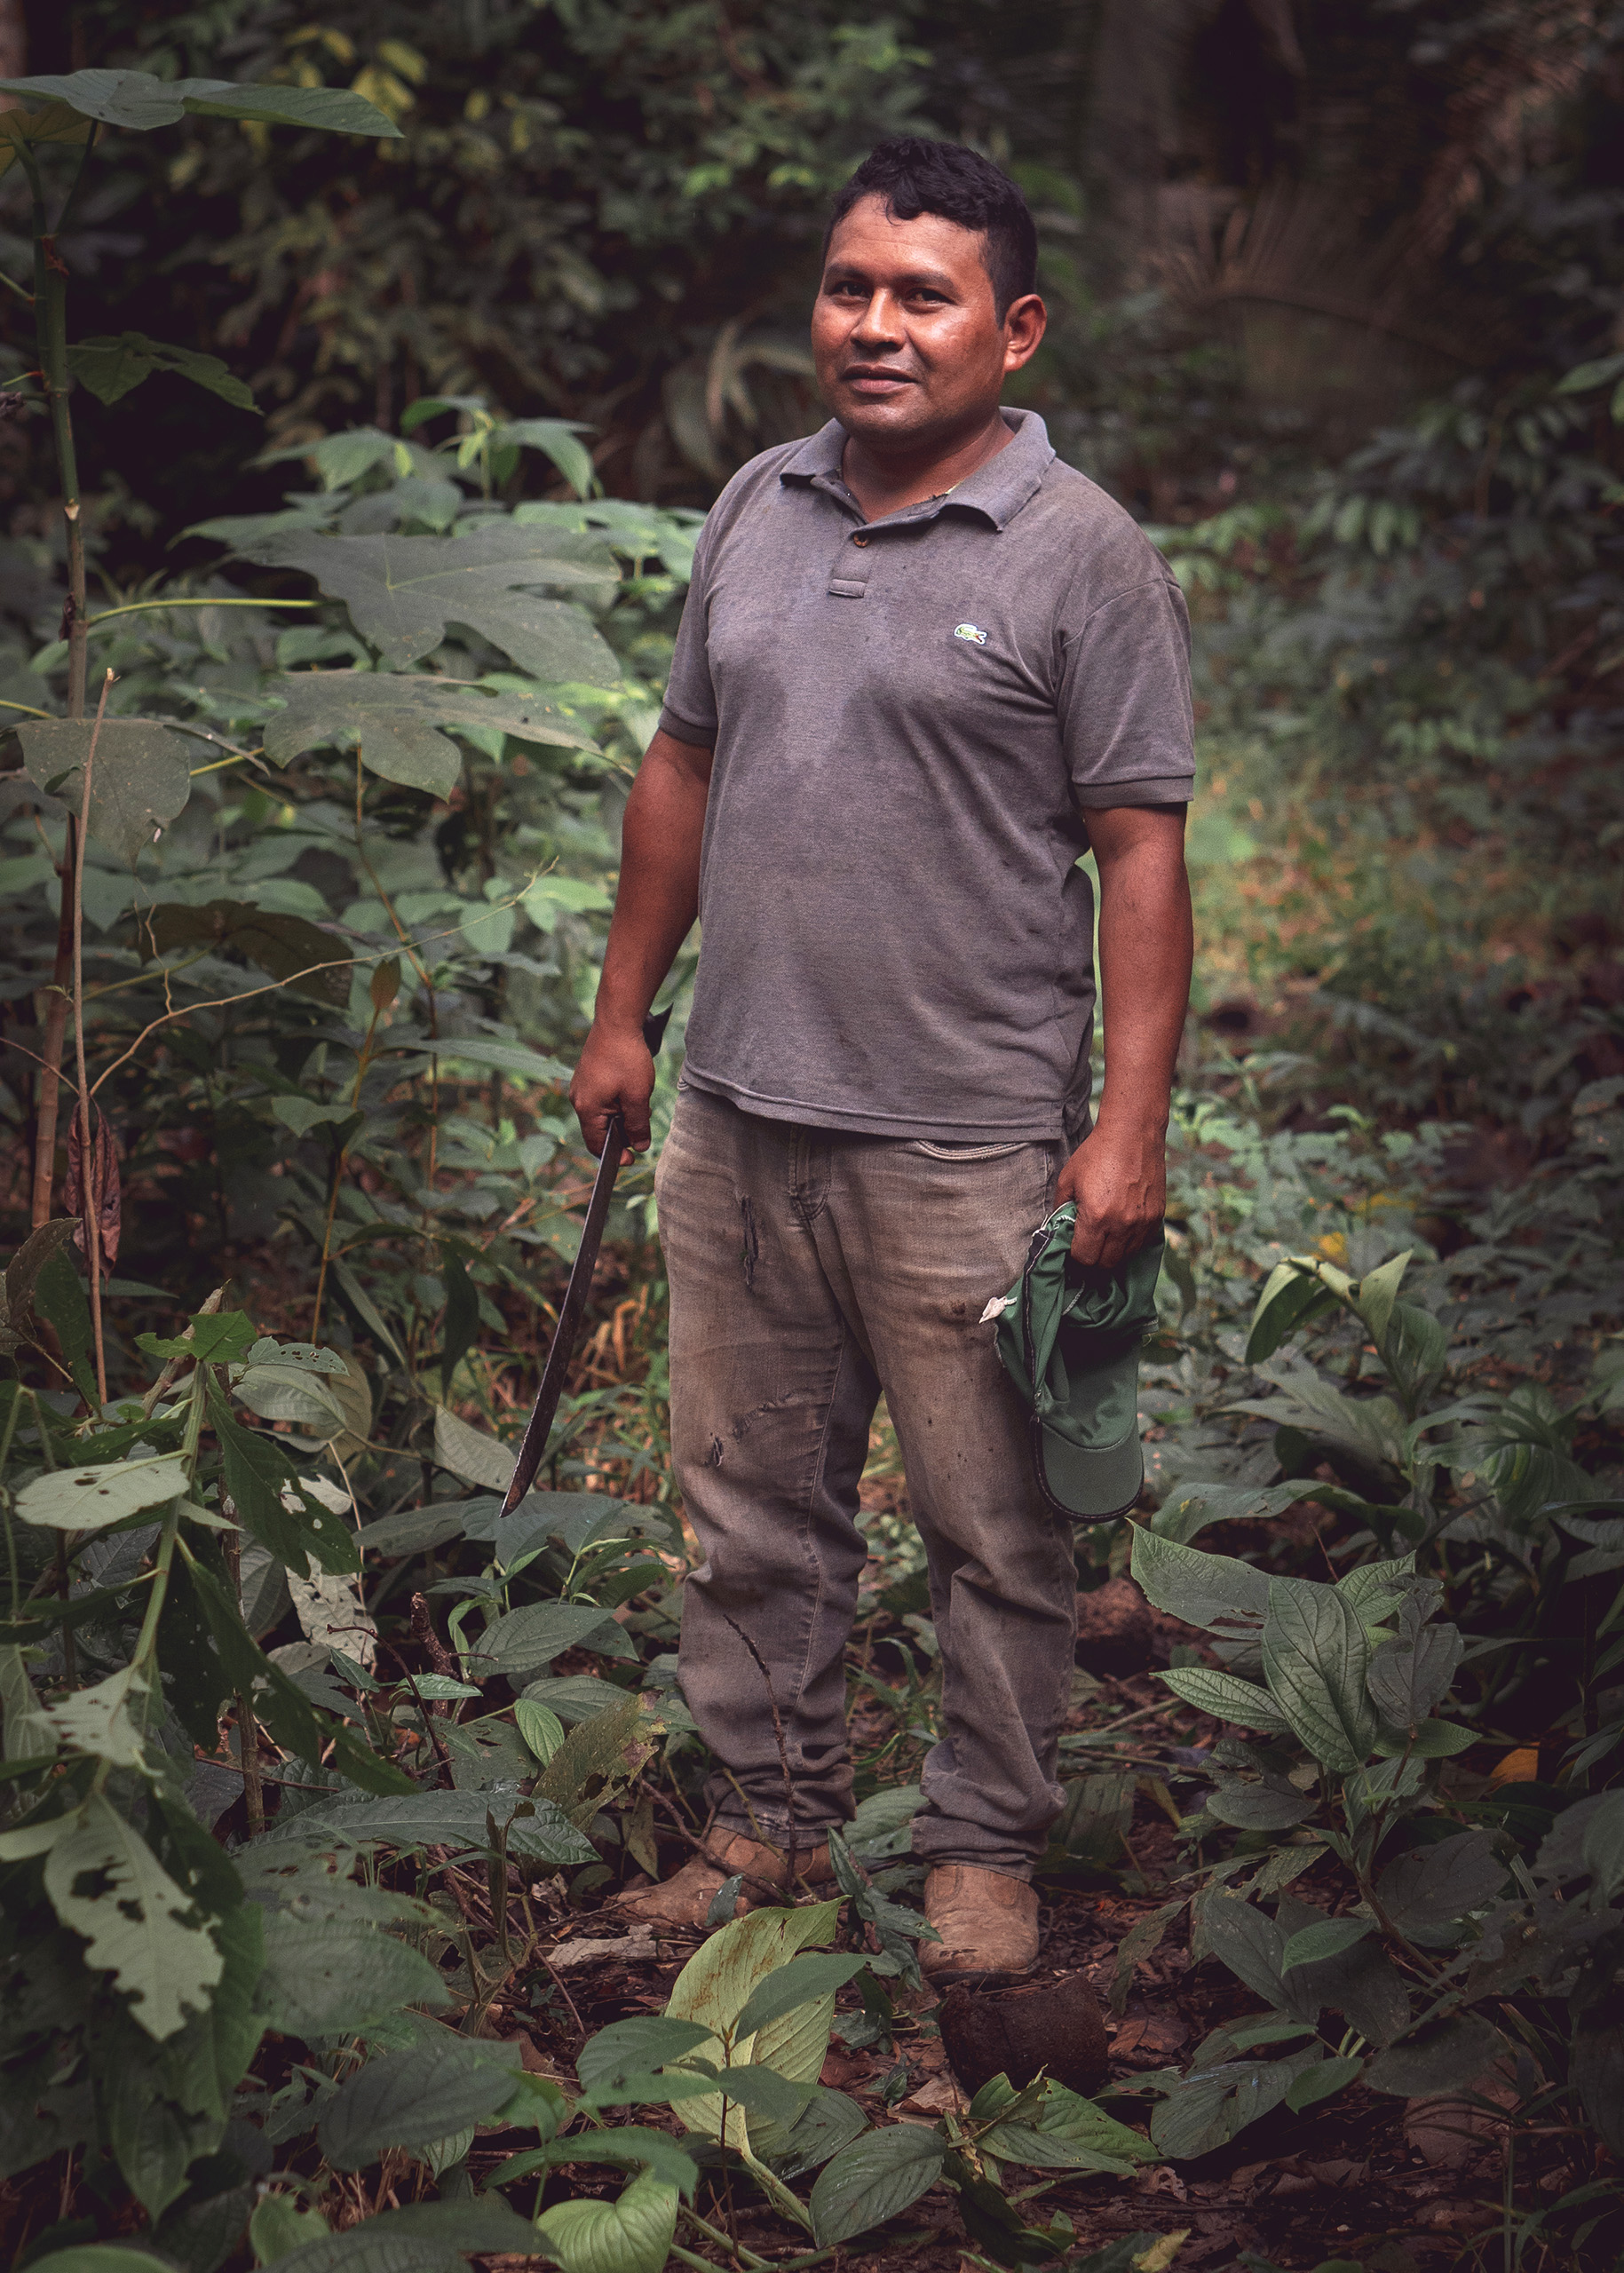 an indigenous Brazil nut collector